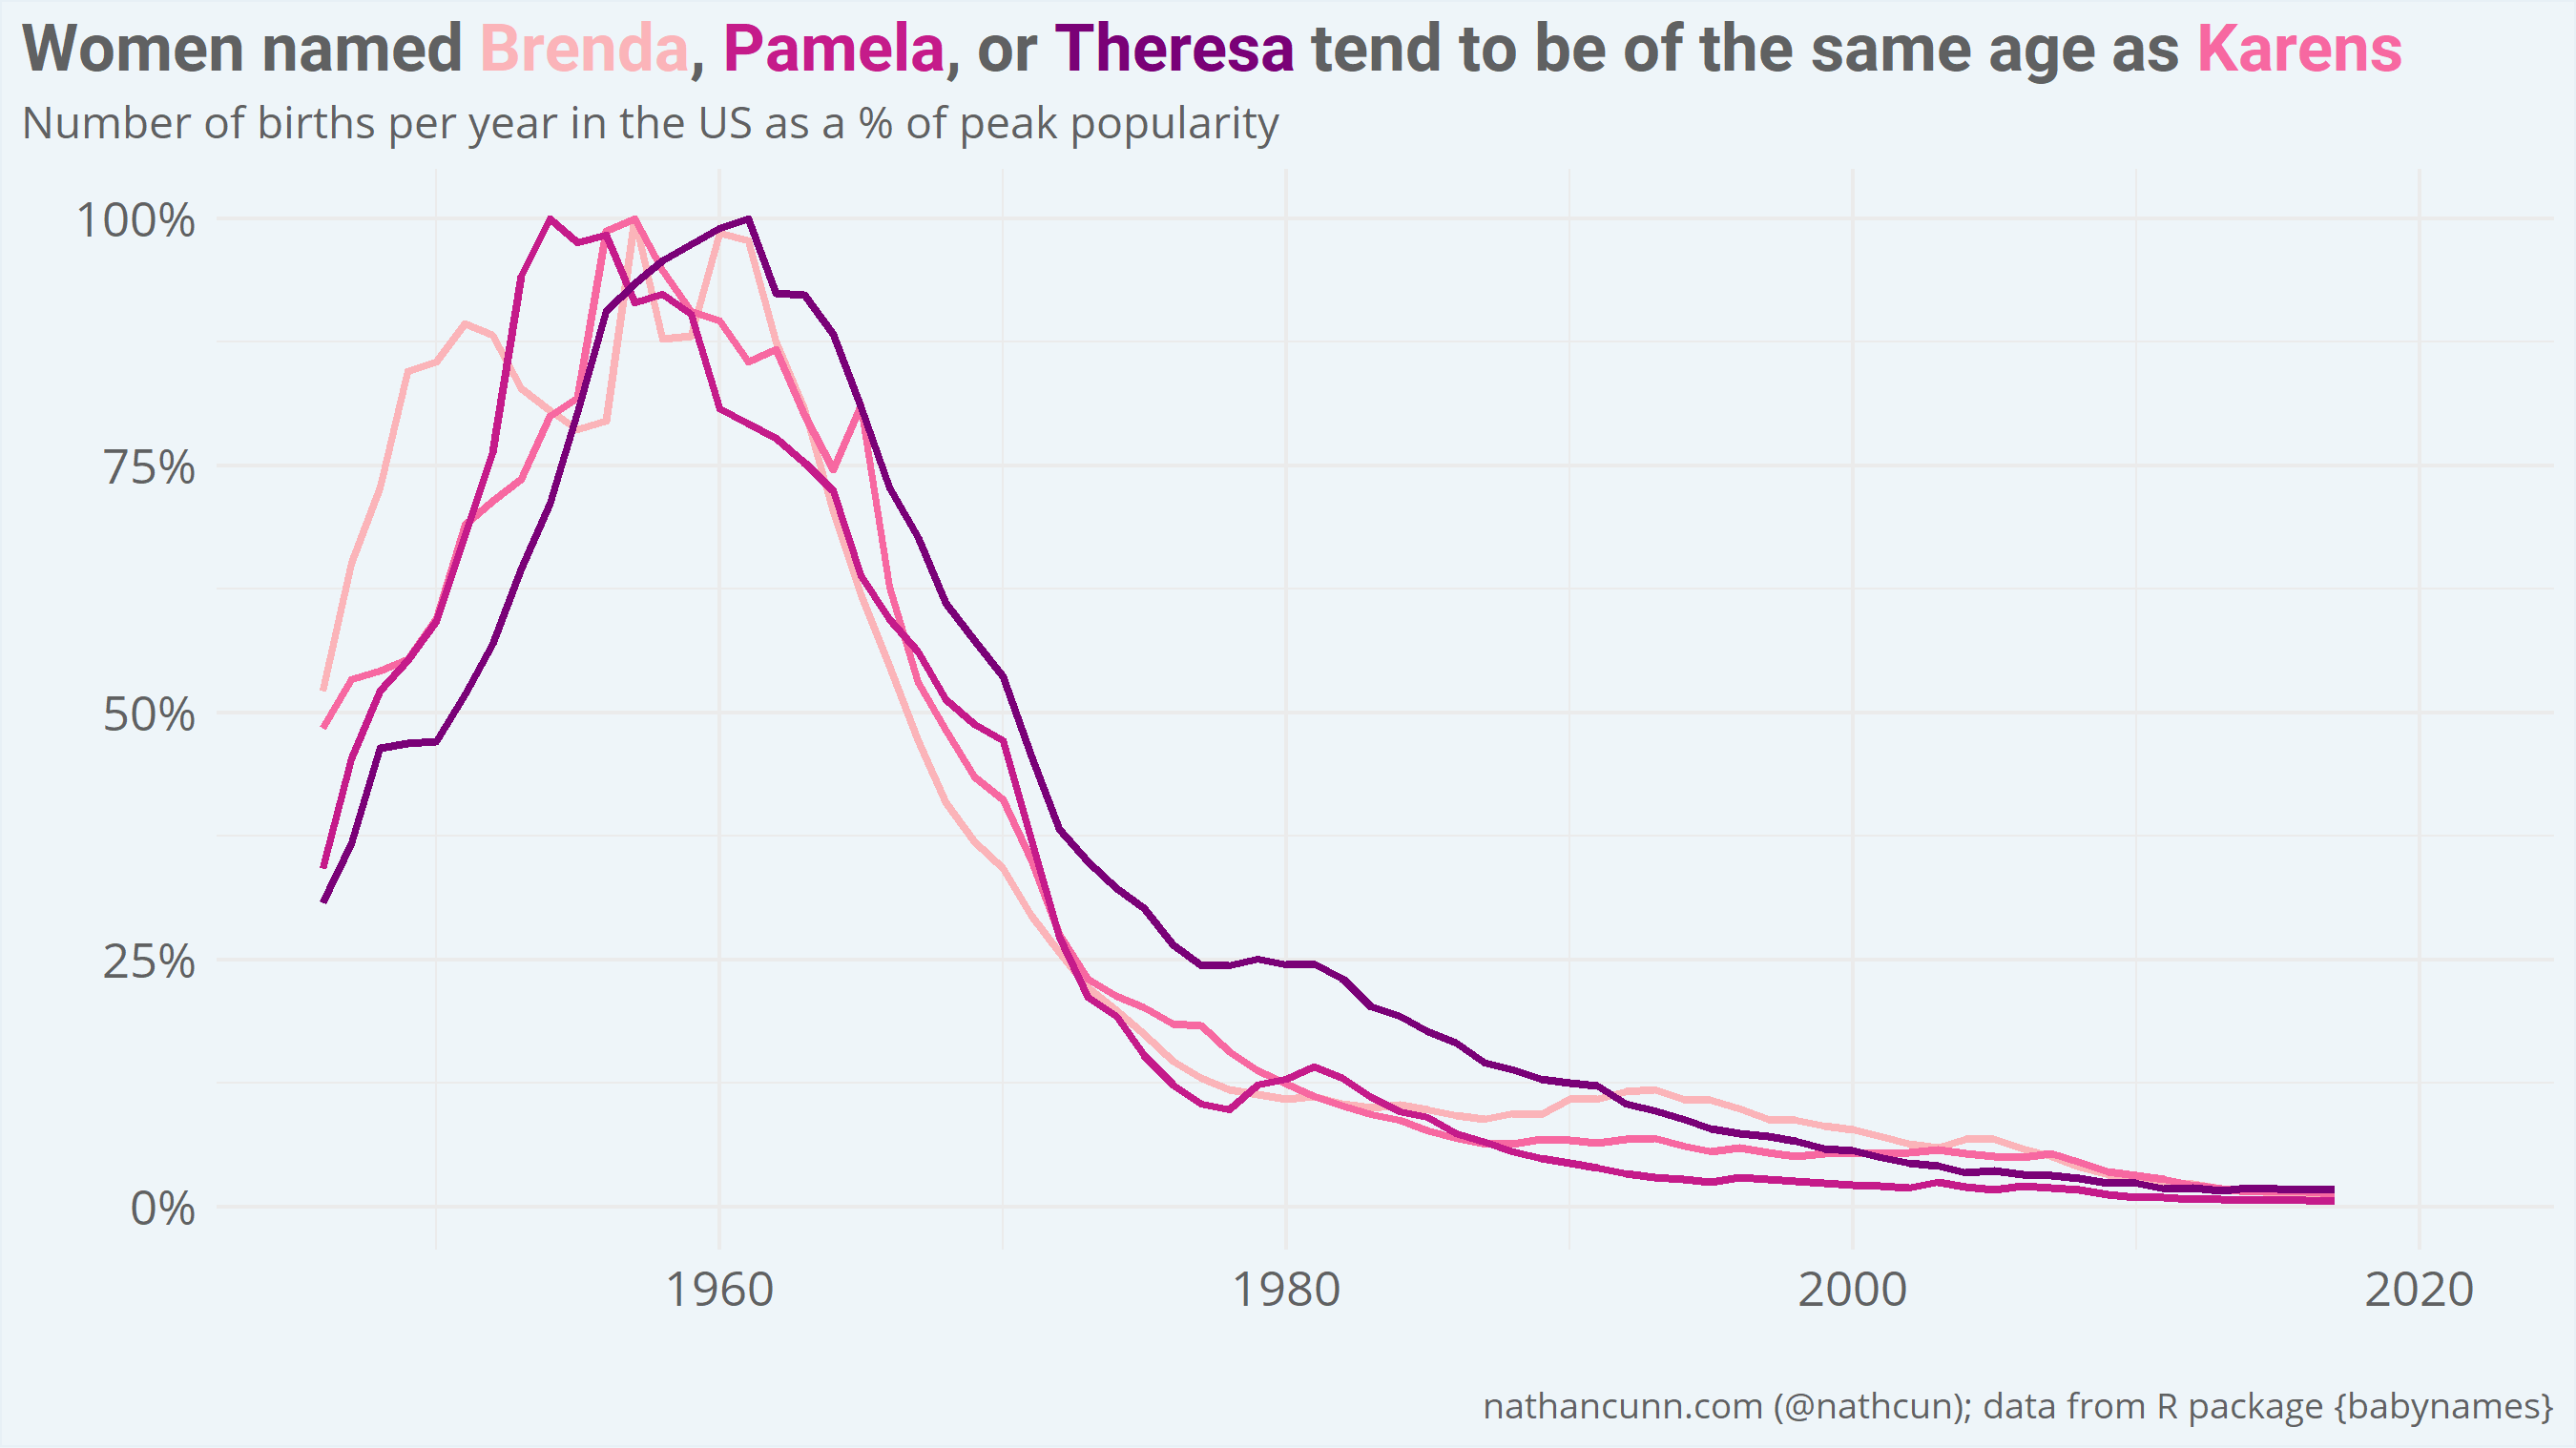 Line chart showing number of Brendas, Pamelas, Theresas, and Karens born per year in the US, with a peak occurring in the late 1950s, and decline from the late 1960s. All names show extremely similar patterns.